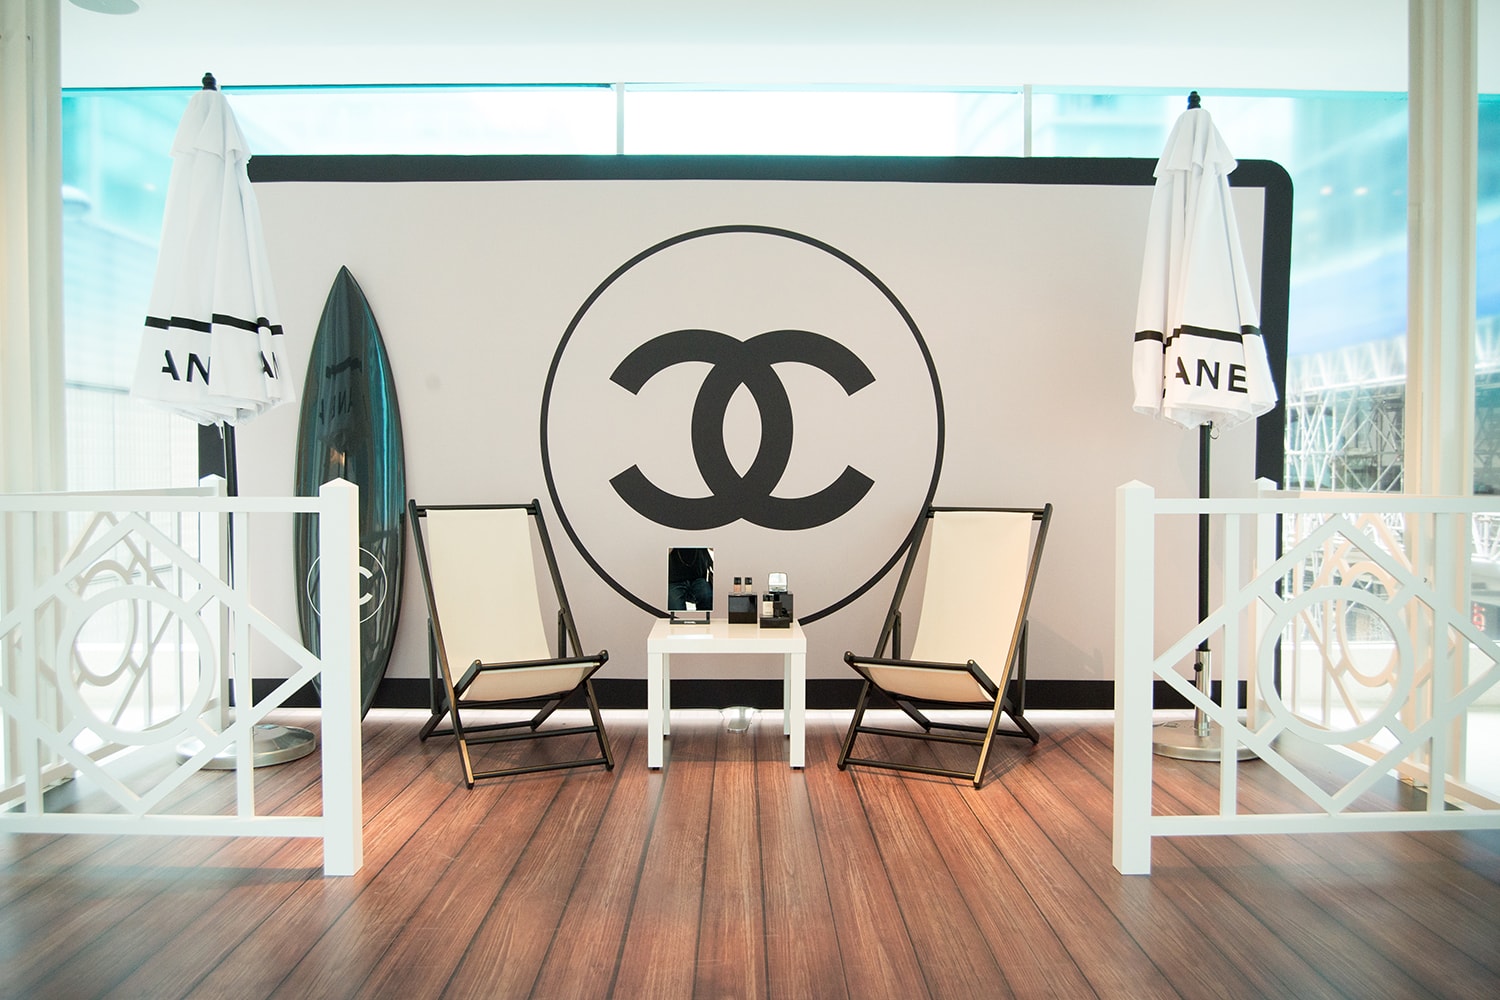 Chanel Is the Latest Luxury Brand Pulling Back From Korean Duty-Free  Segment